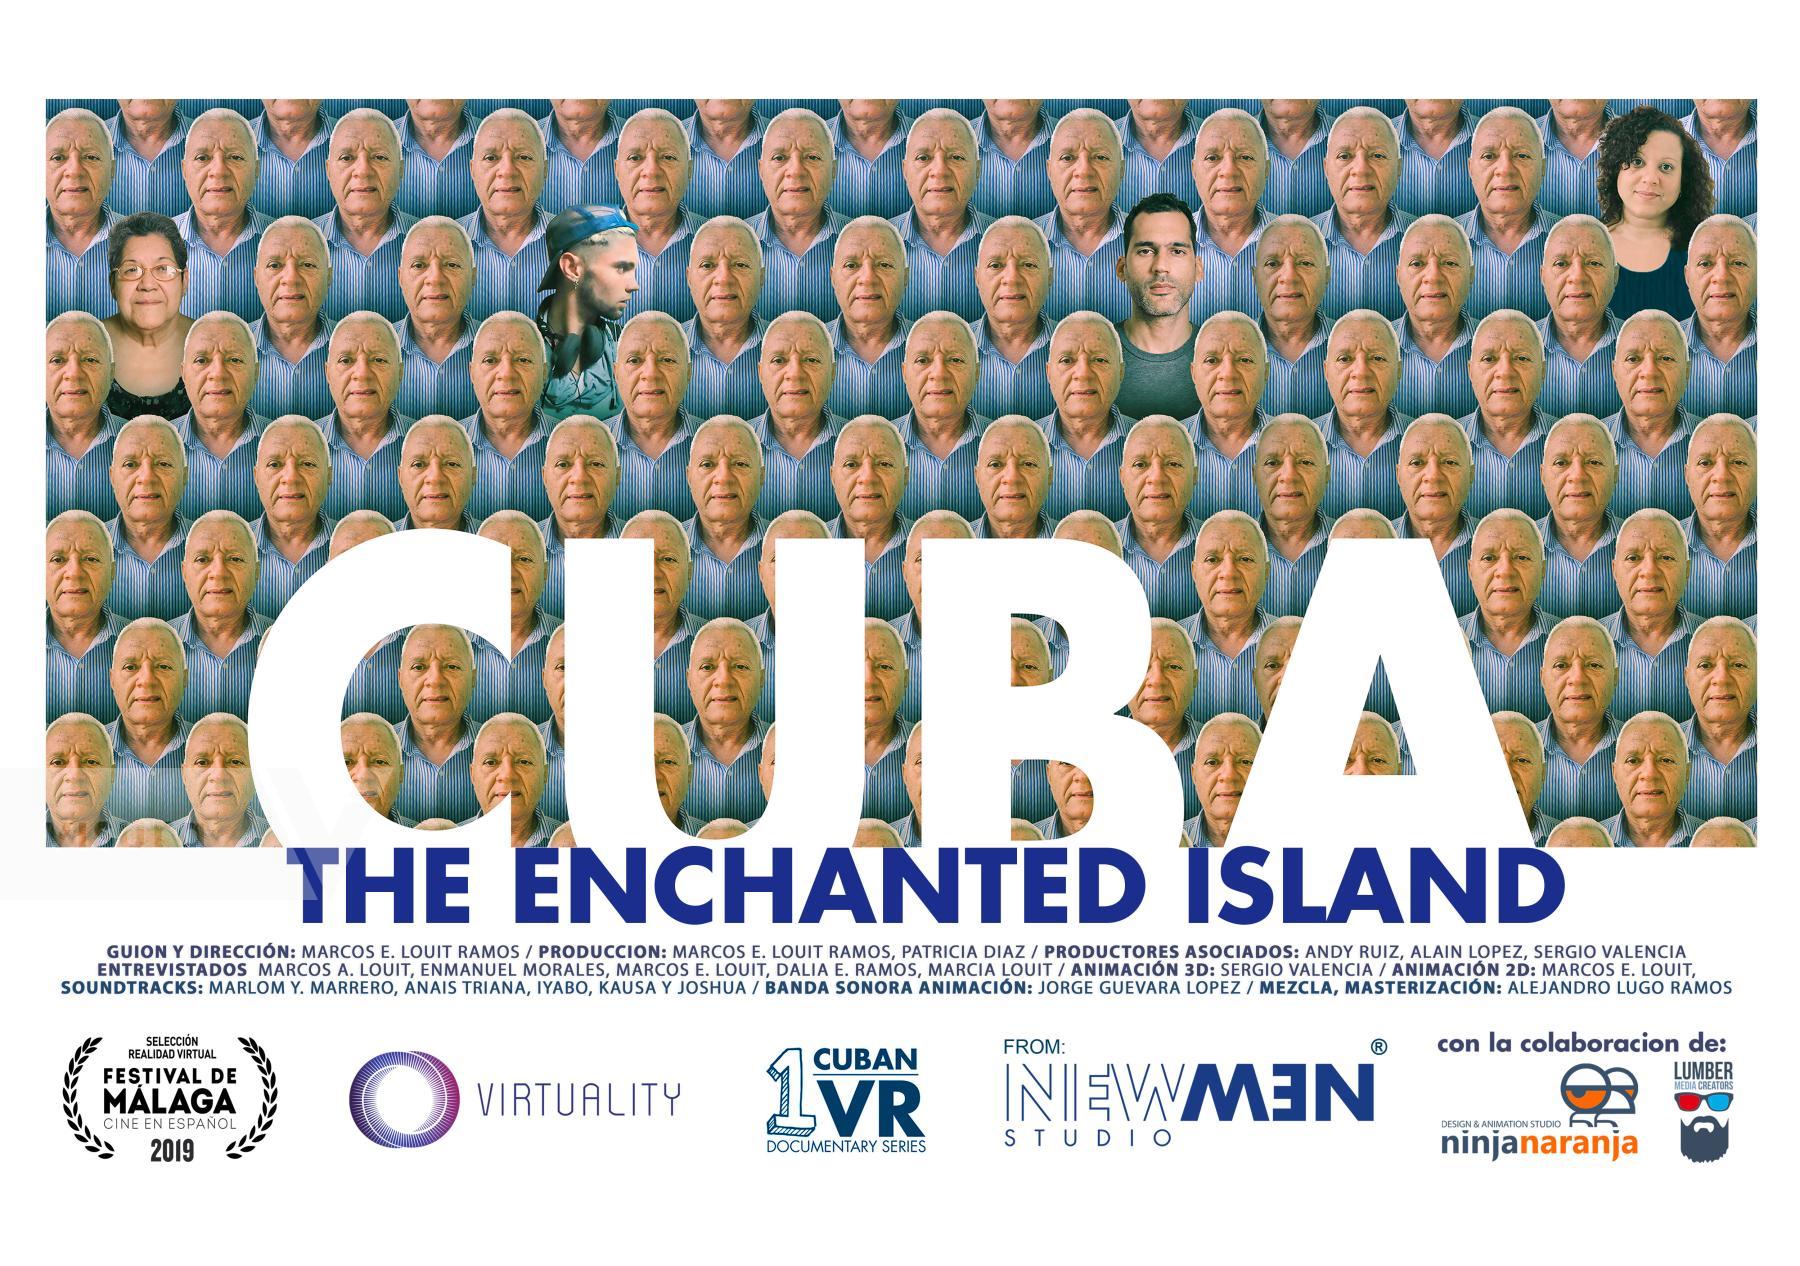 Purchase Cuba, the enchanted island by Marcos Louit